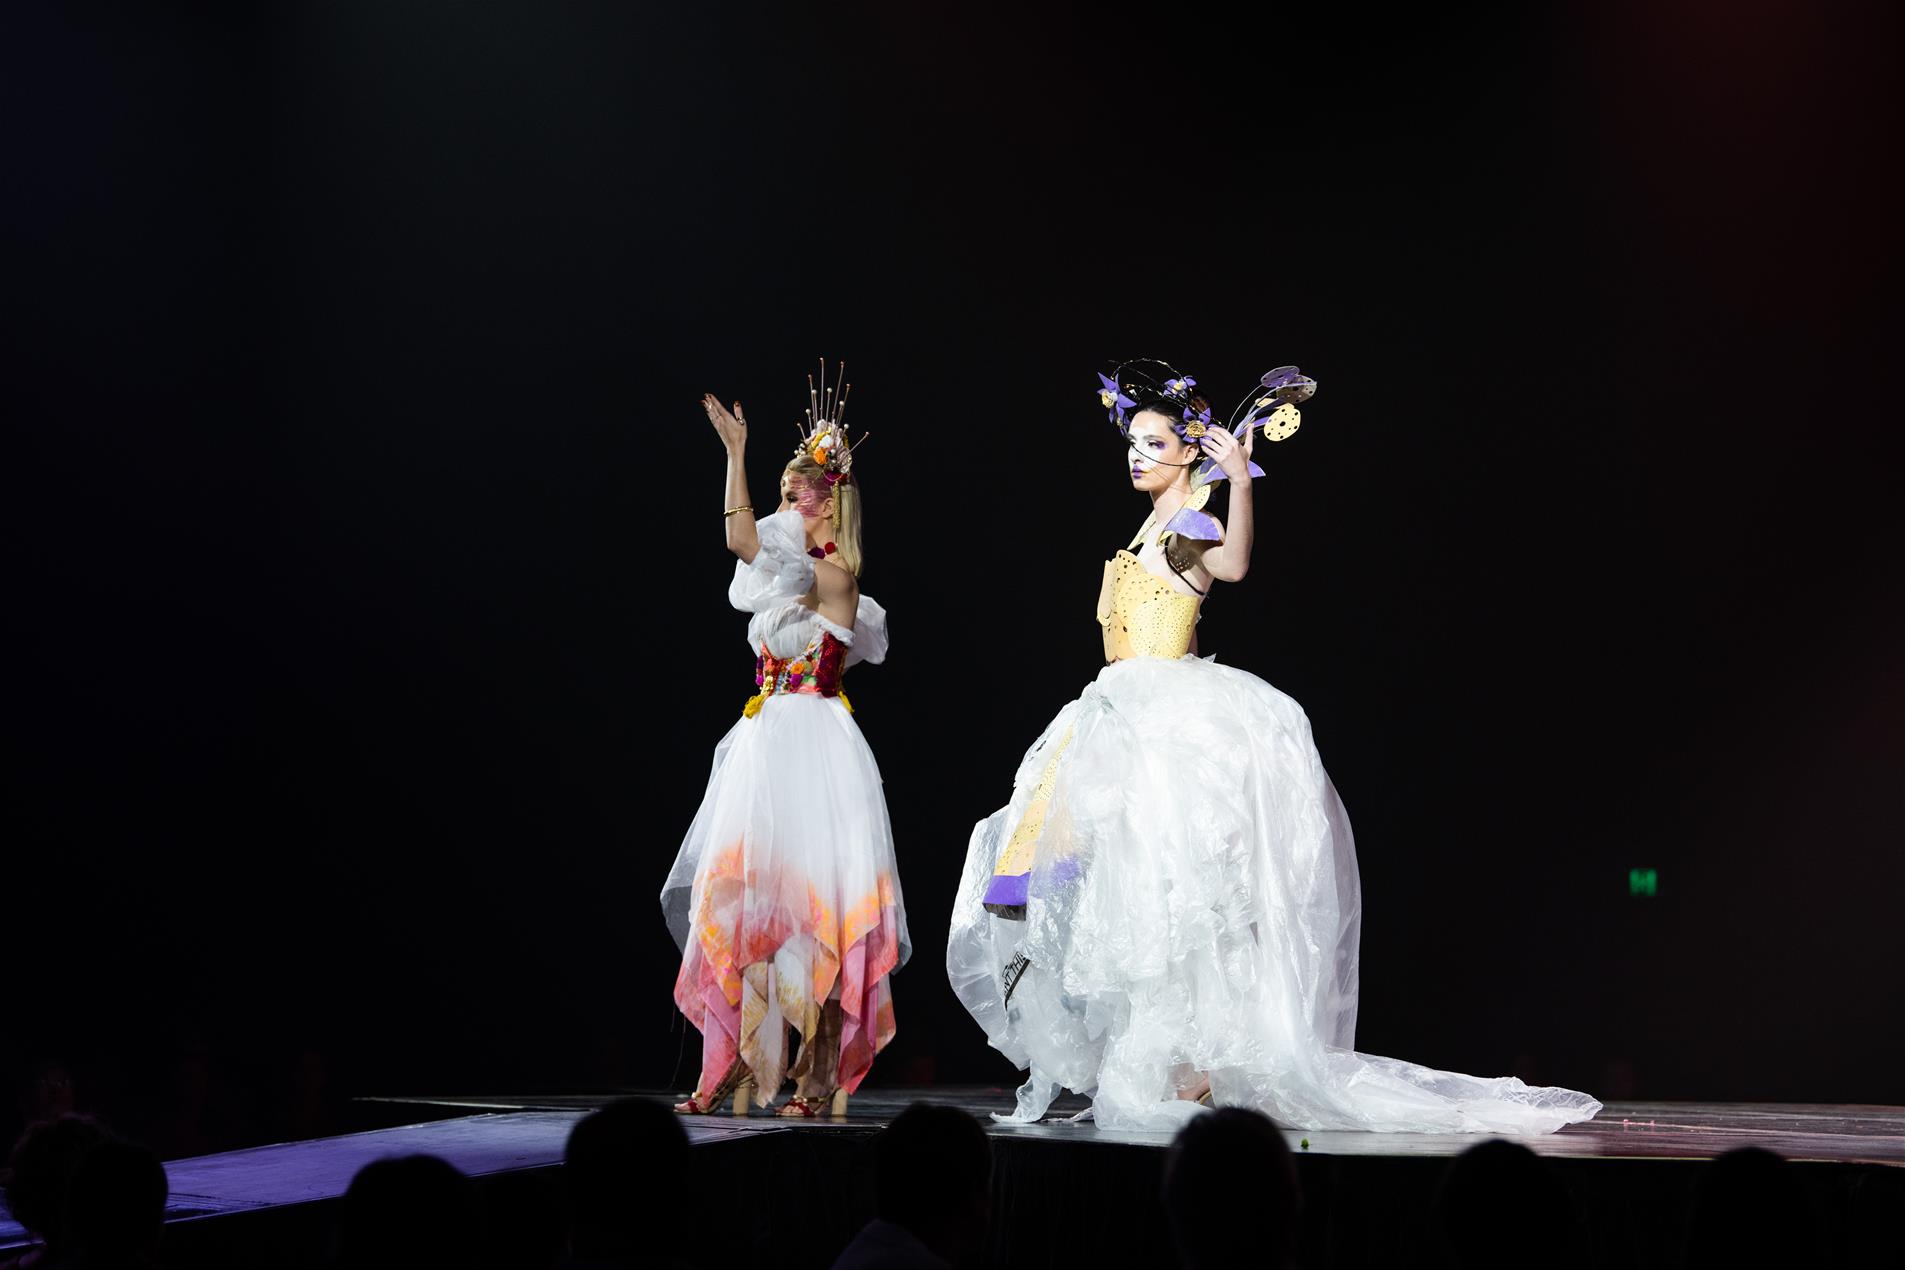 Two female models wearing colourful dresses on stage.